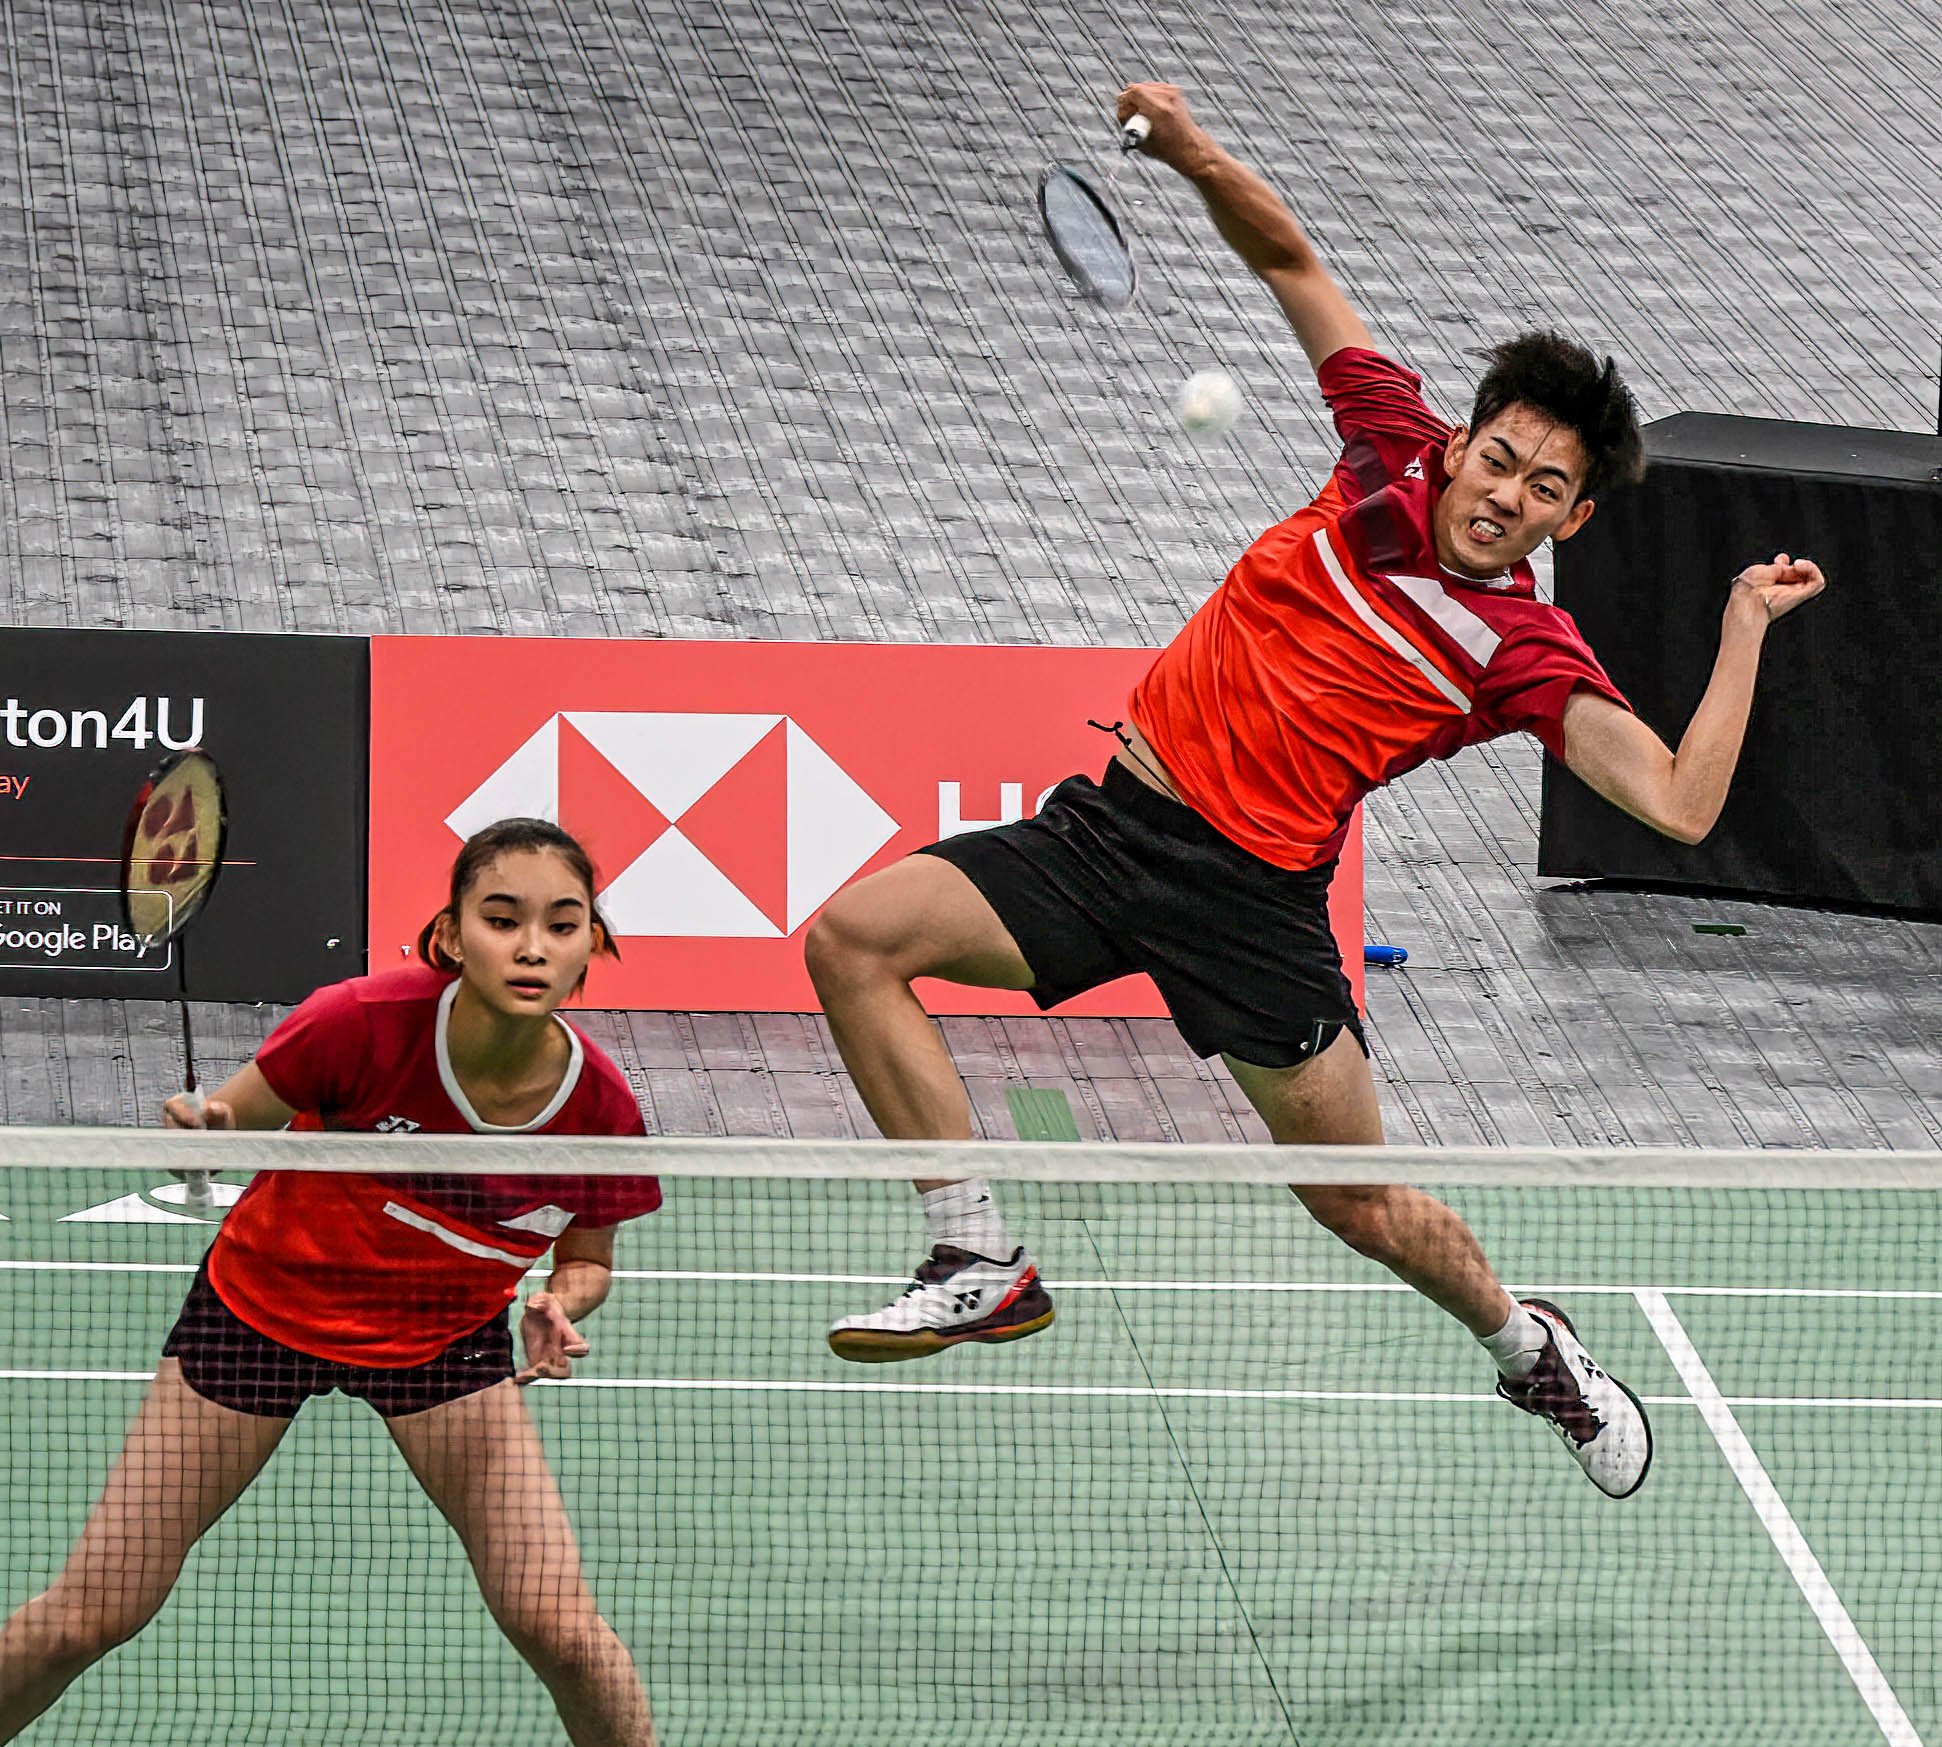 Spokane is hosting its first world sports event at the Podium, the junior badminton championship The Spokesman-Review